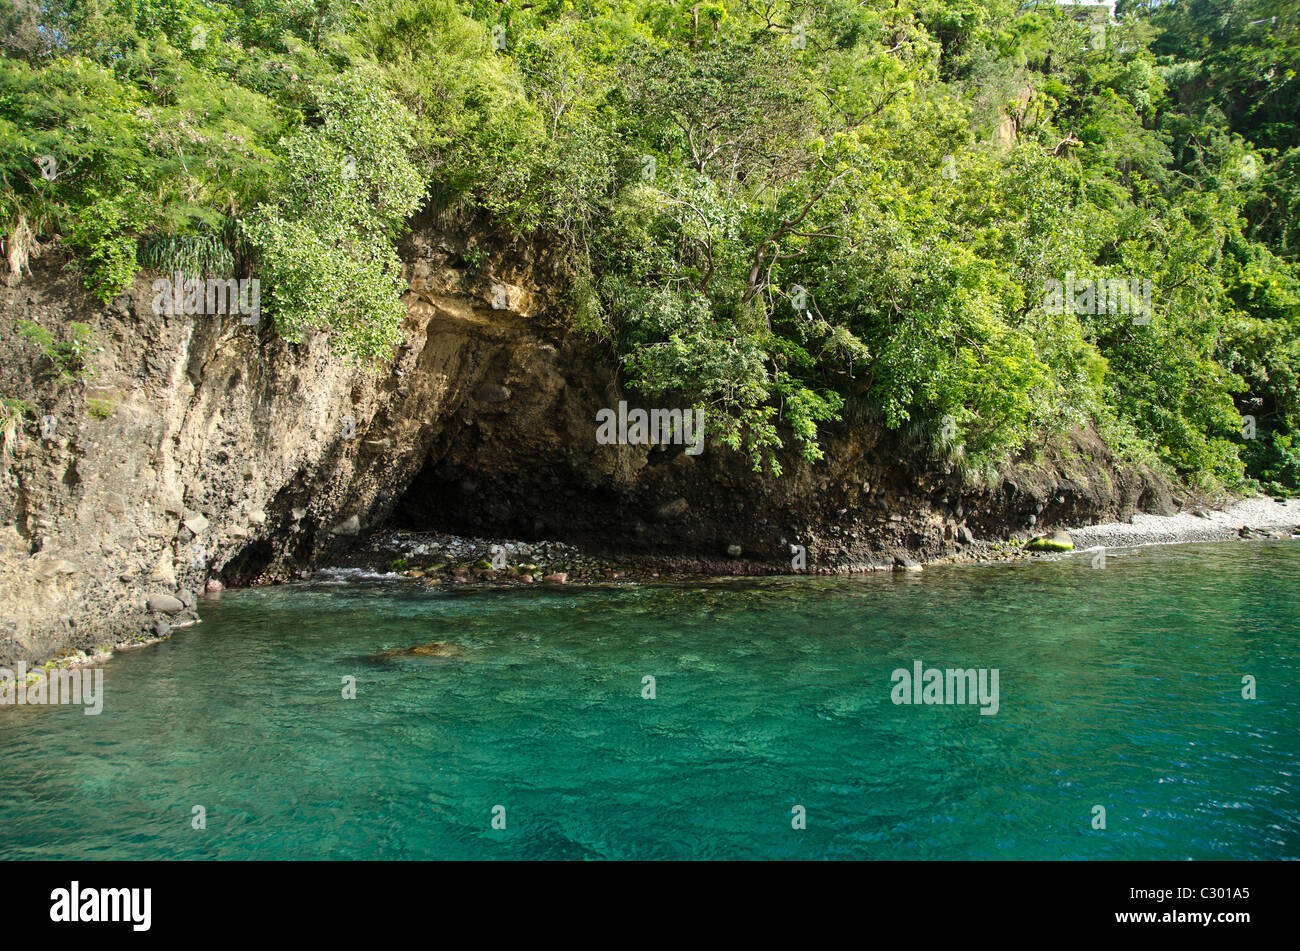 St Vincent island rocky coastline with a cave flooded by Caribbean sea Stock Photo